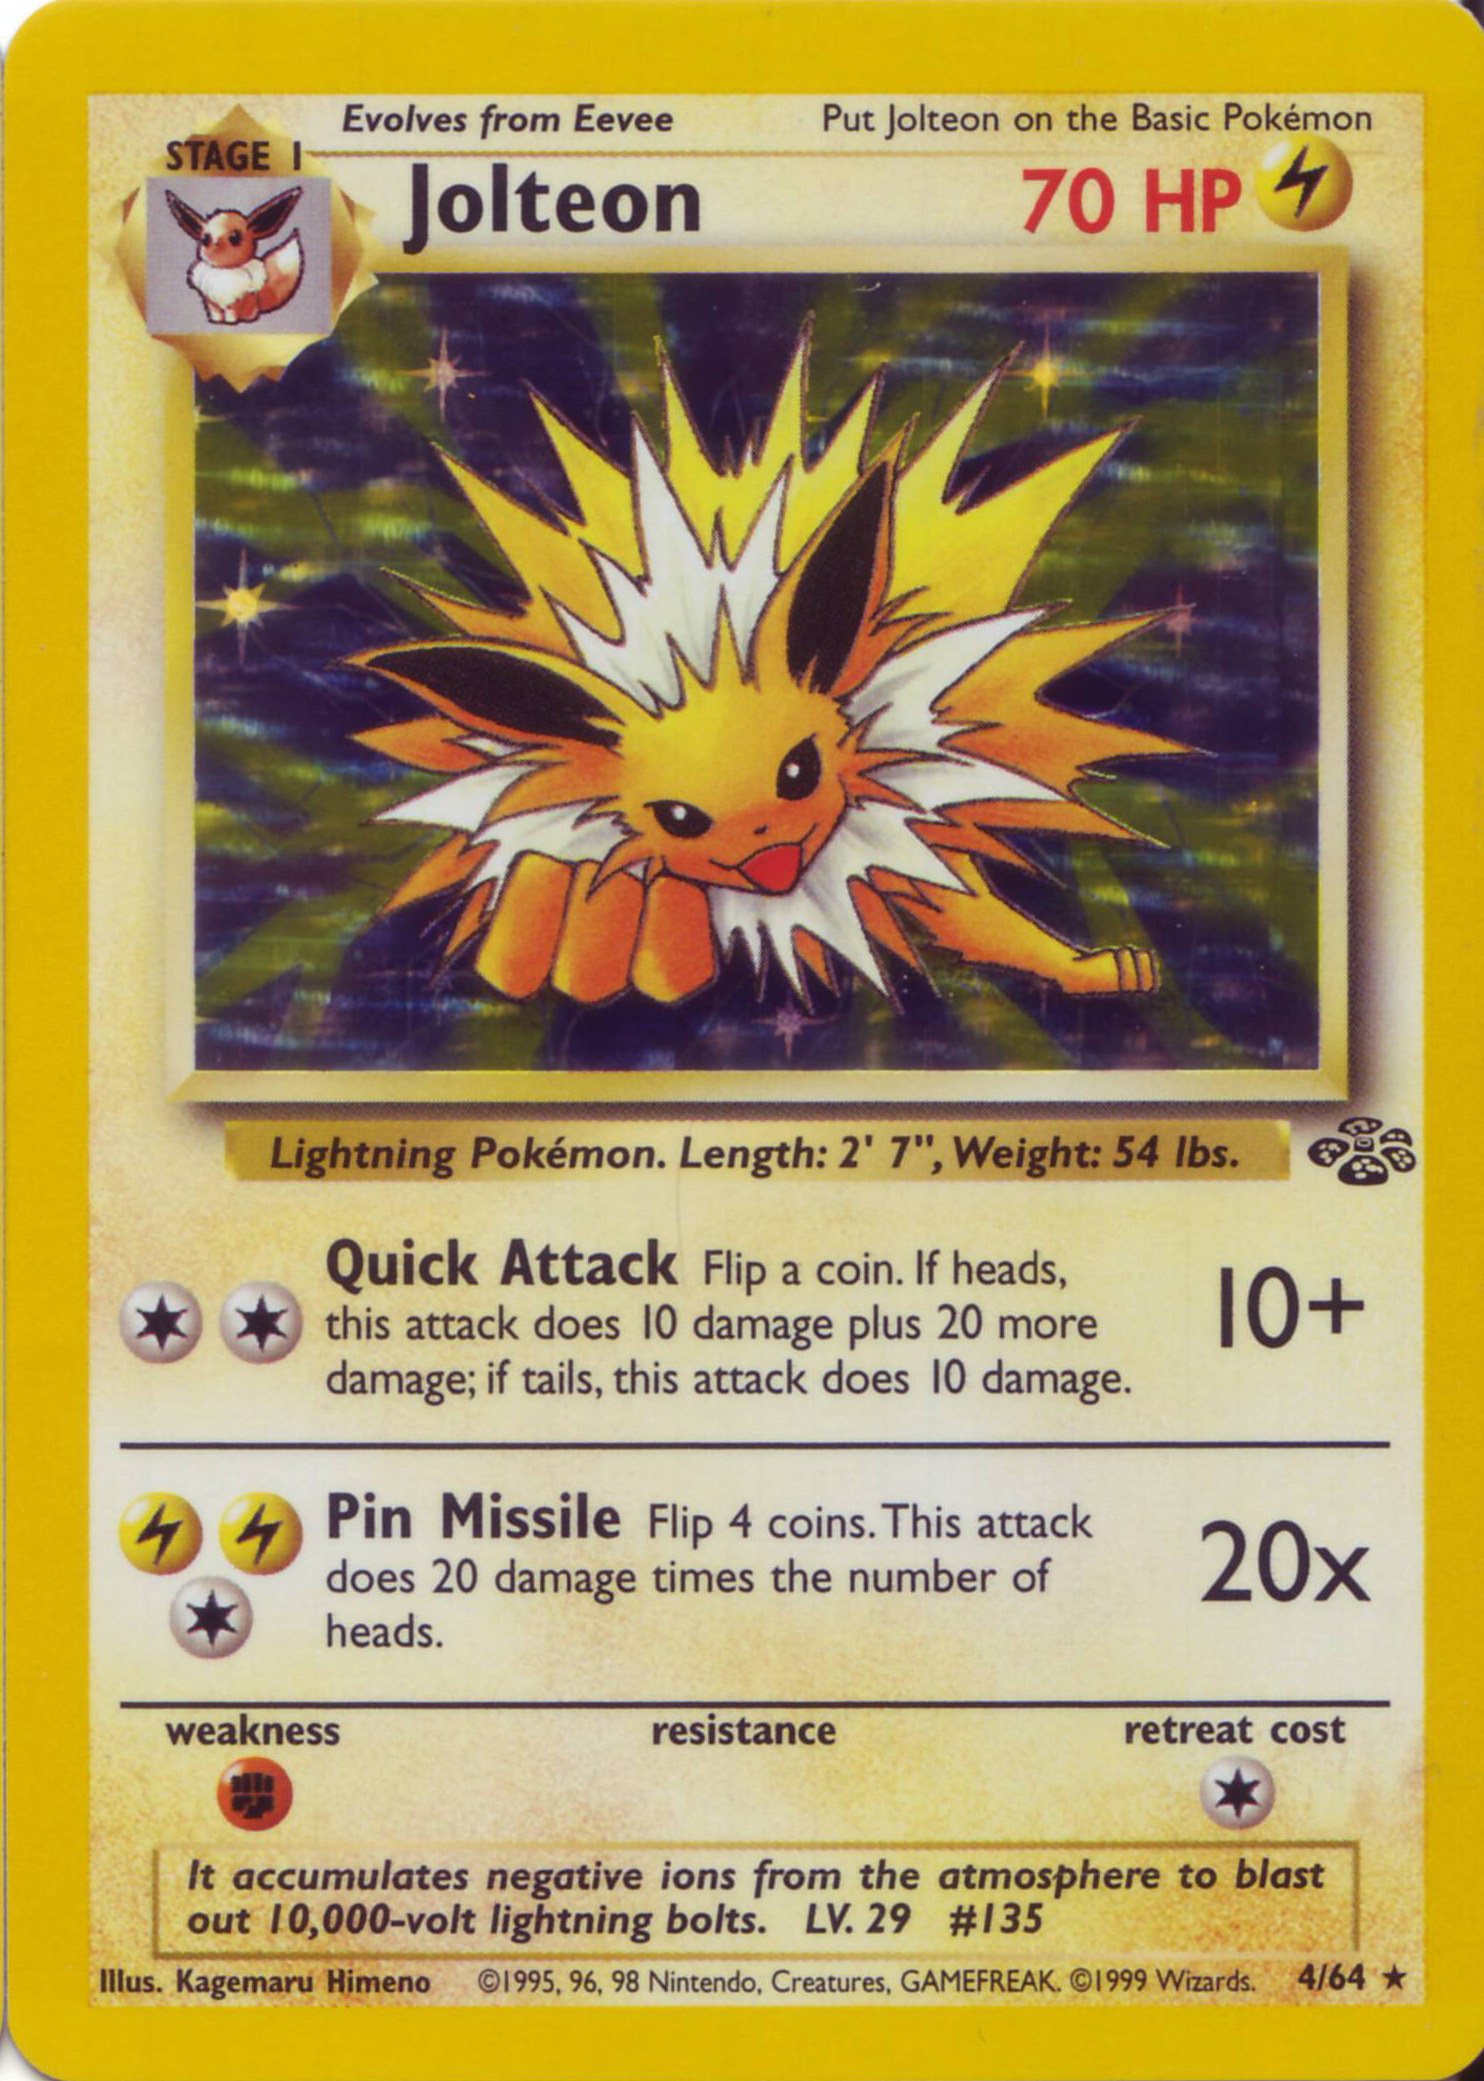 Your favorite card of your favorite Pokémon!